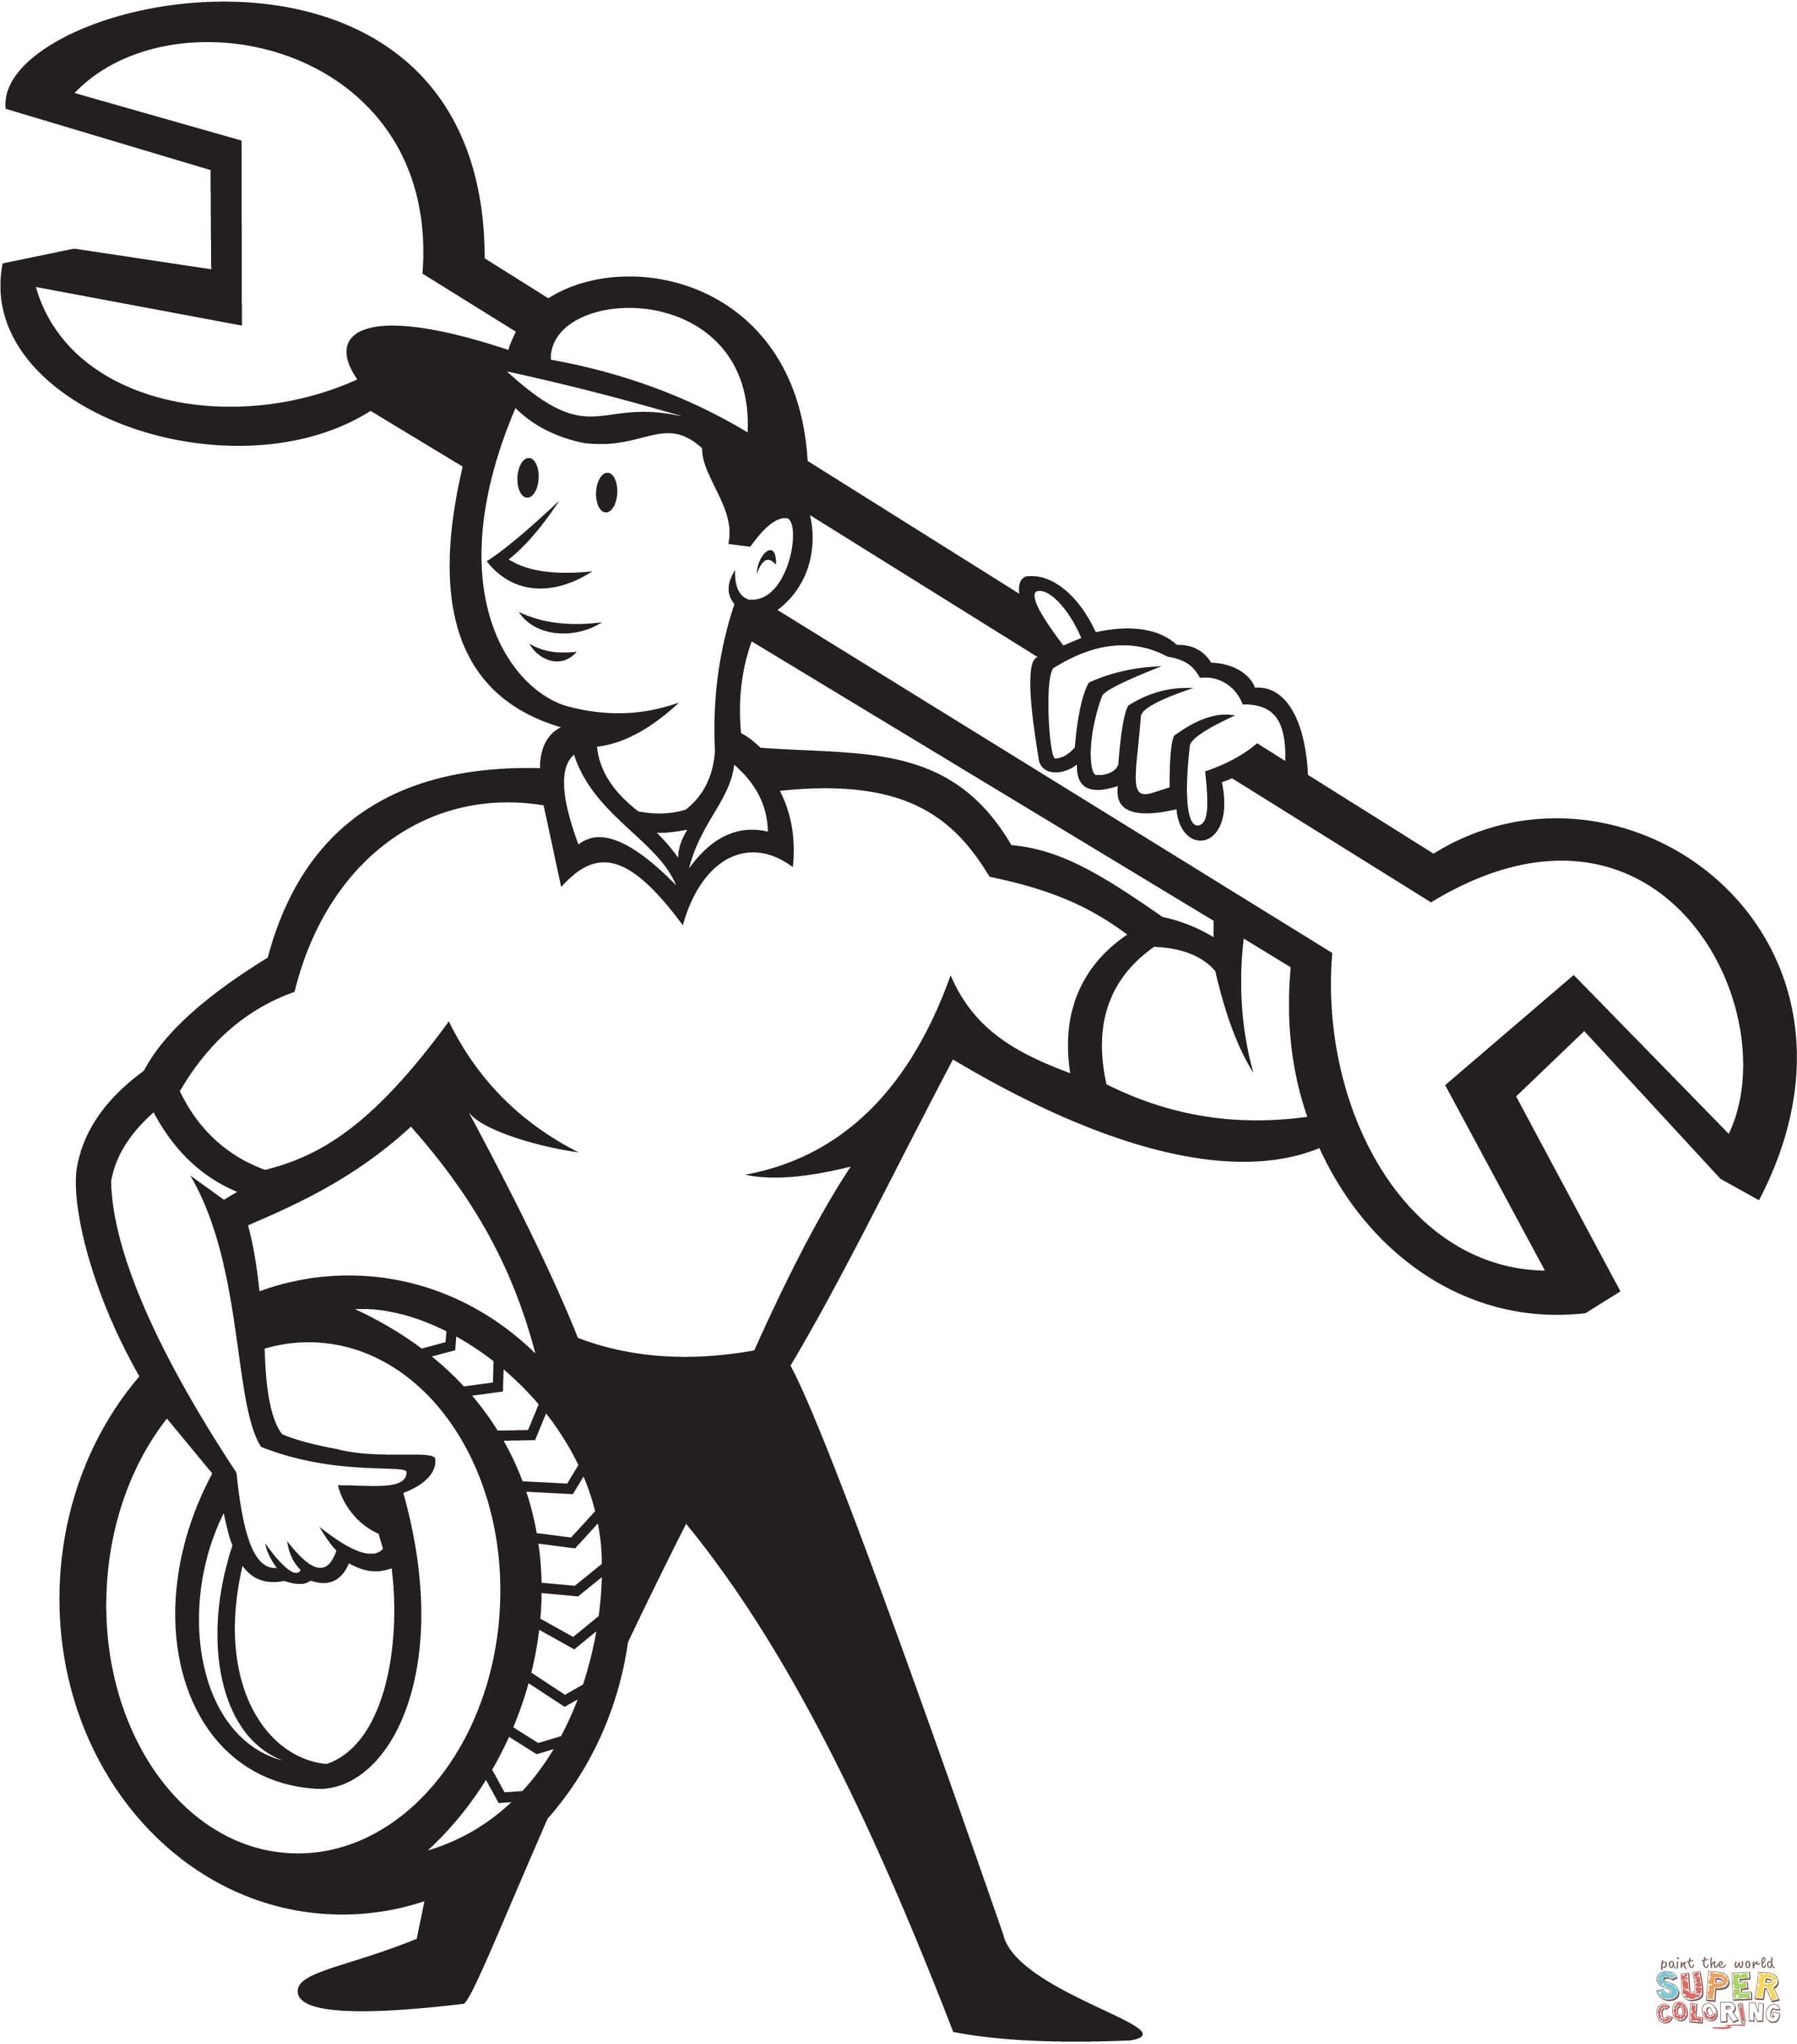 Mechanic clipart drawing, Mechanic drawing Transparent FREE for